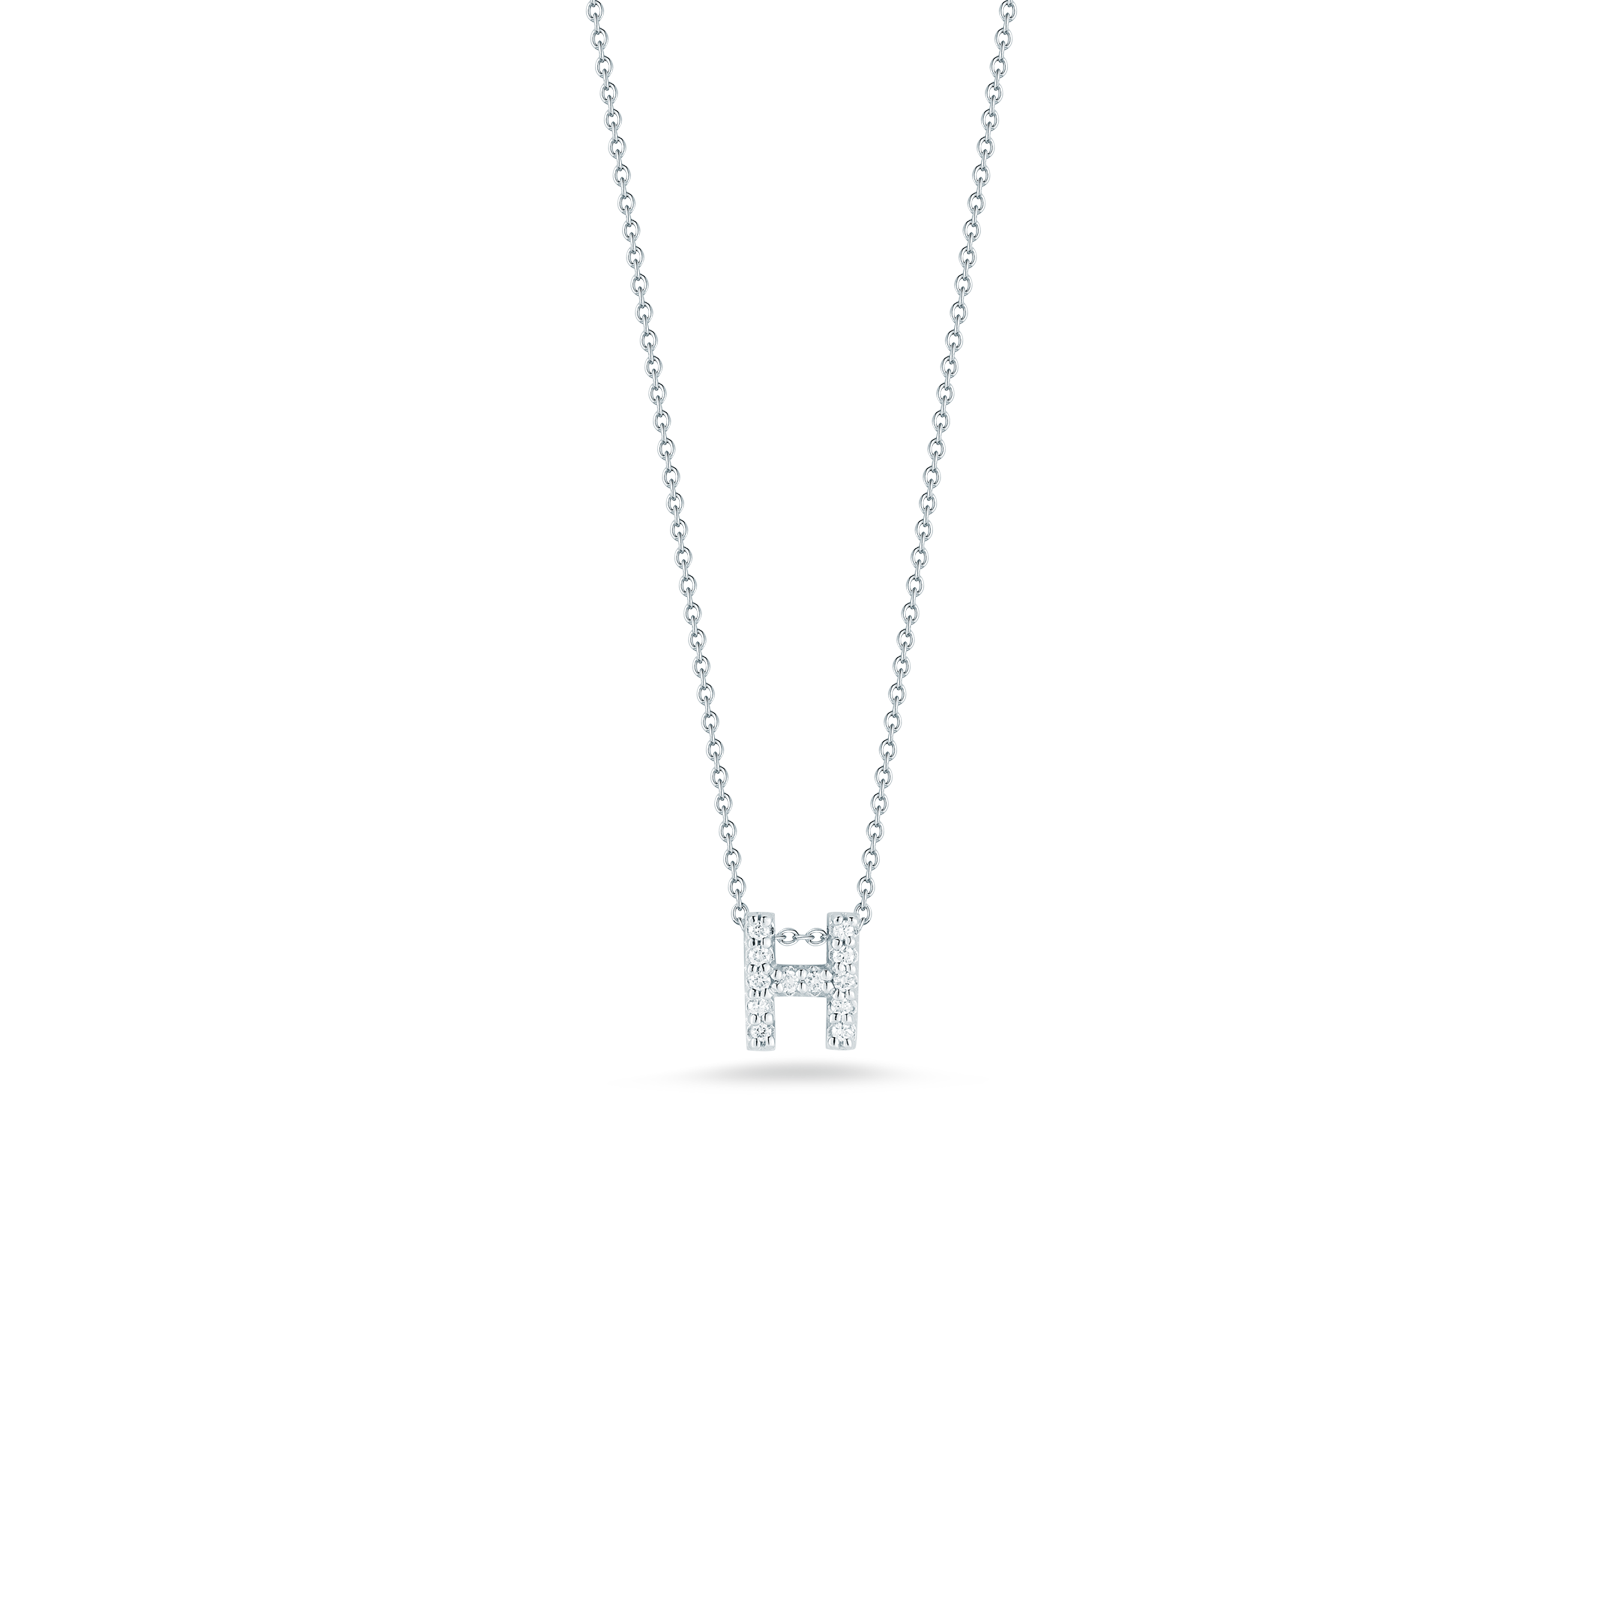 Roberto Coin lady s eighteen karat white gold diamond love letter necklace suspended on an eighteen karat white gold oval link chain measuring 18 inches adjustable to 16 inches